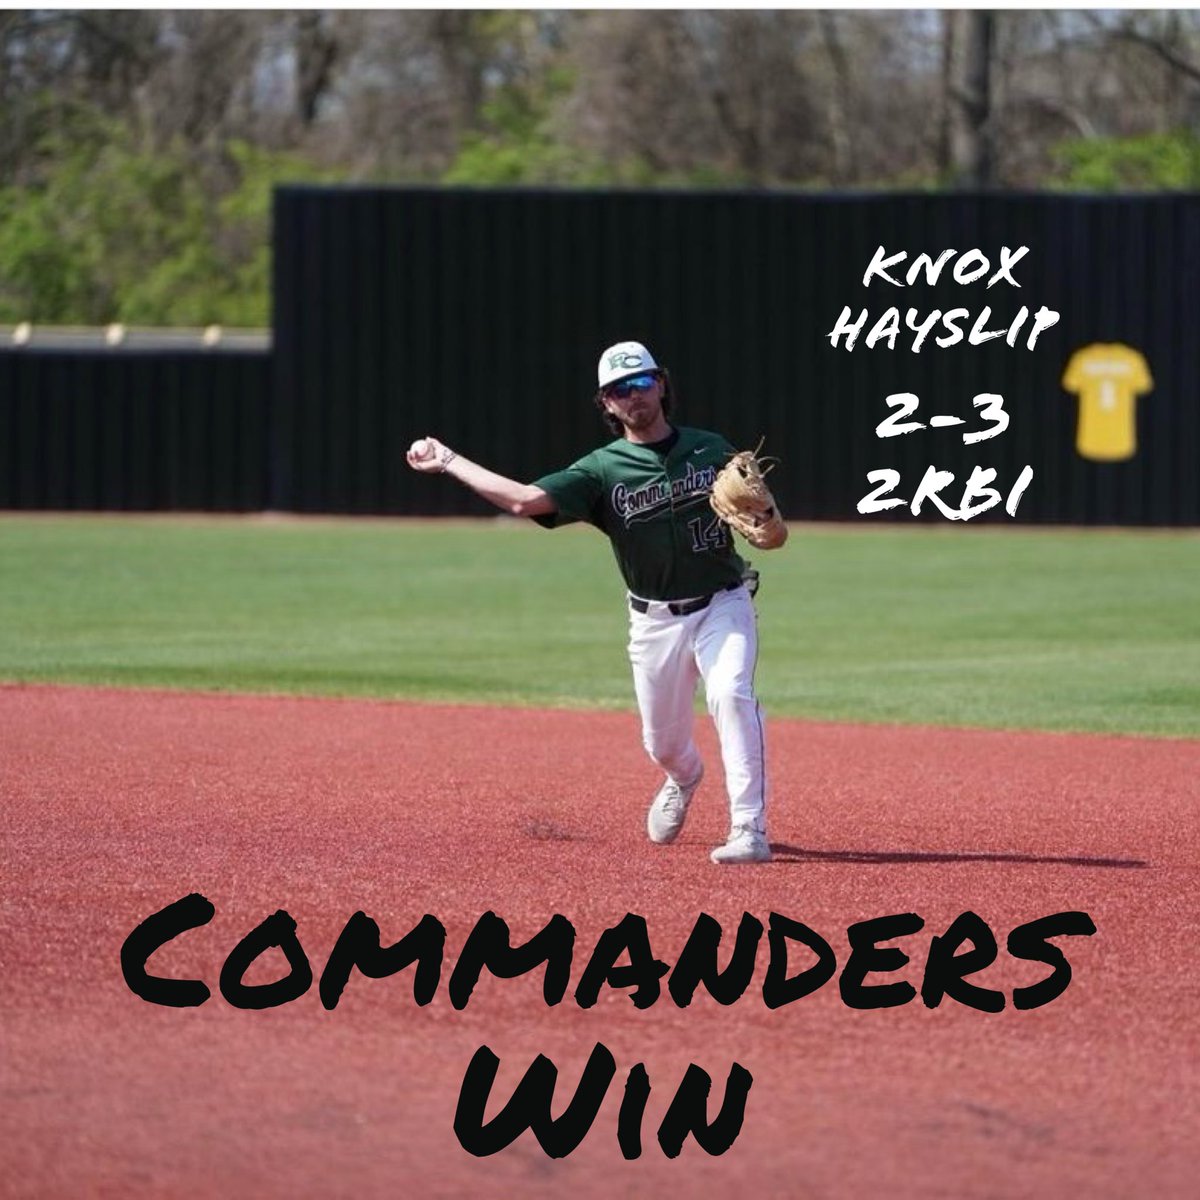 Commanders W again. Lots of good ABs & a great start on the mound by @willbarnwell_18 who throws 3 hitless/scoreless innings. @ElijahStockton9 with his first 💣 of the year. Same two teams tomorrow in #PossumTown barring any bad weather rolling through. #CommanderBaseball